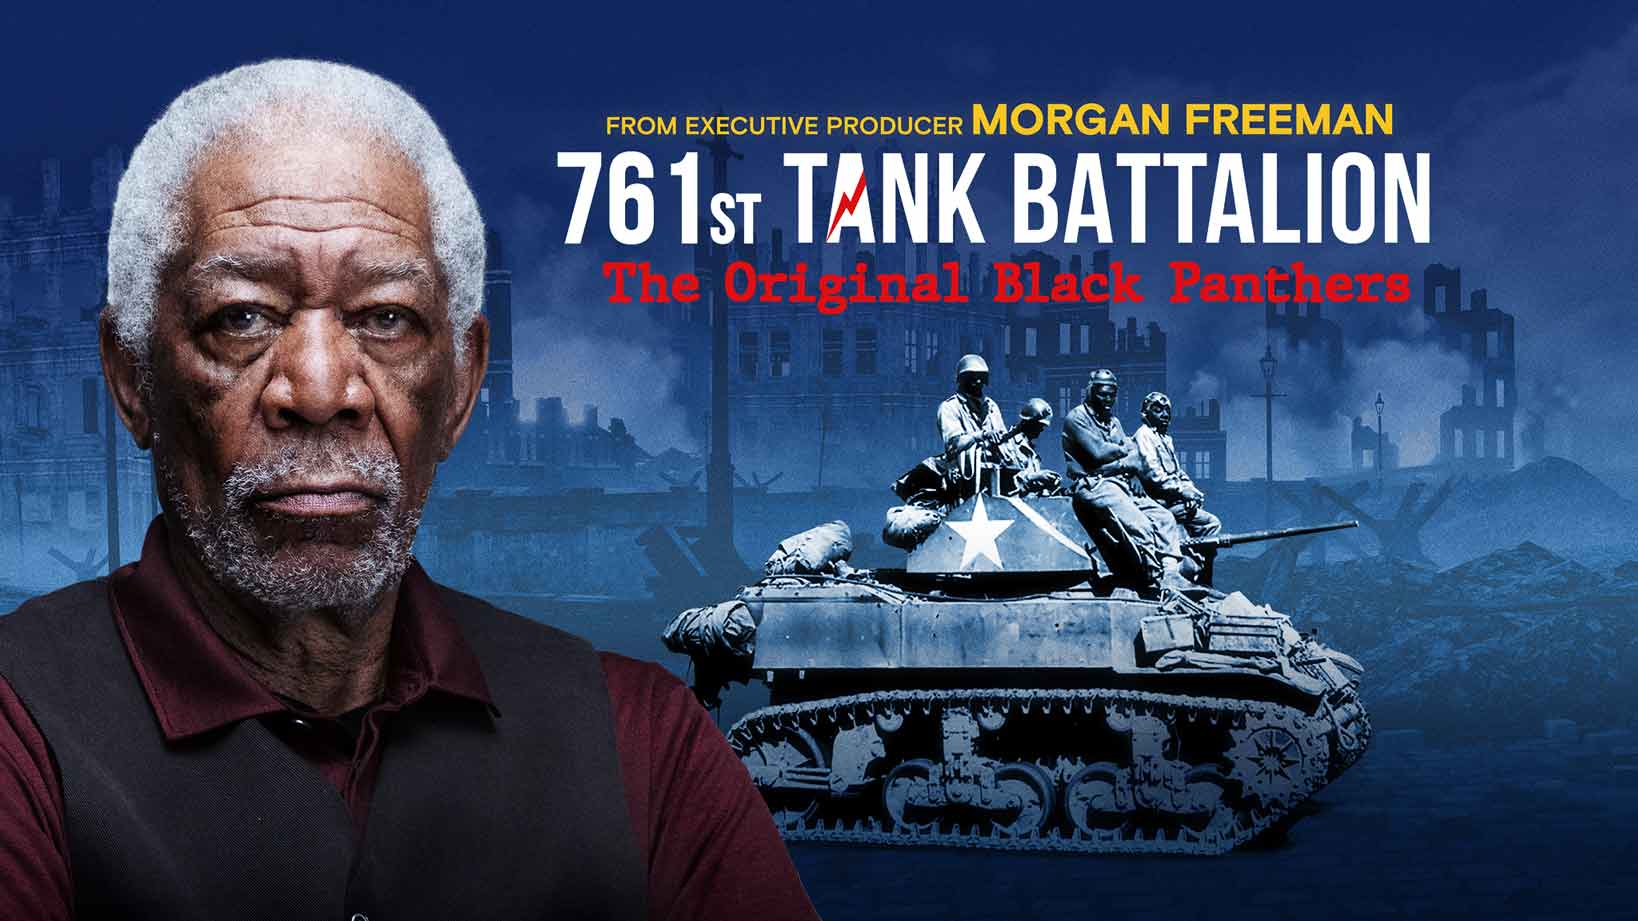 Morgan Freeman; behind him are African American soldiers in a tank.